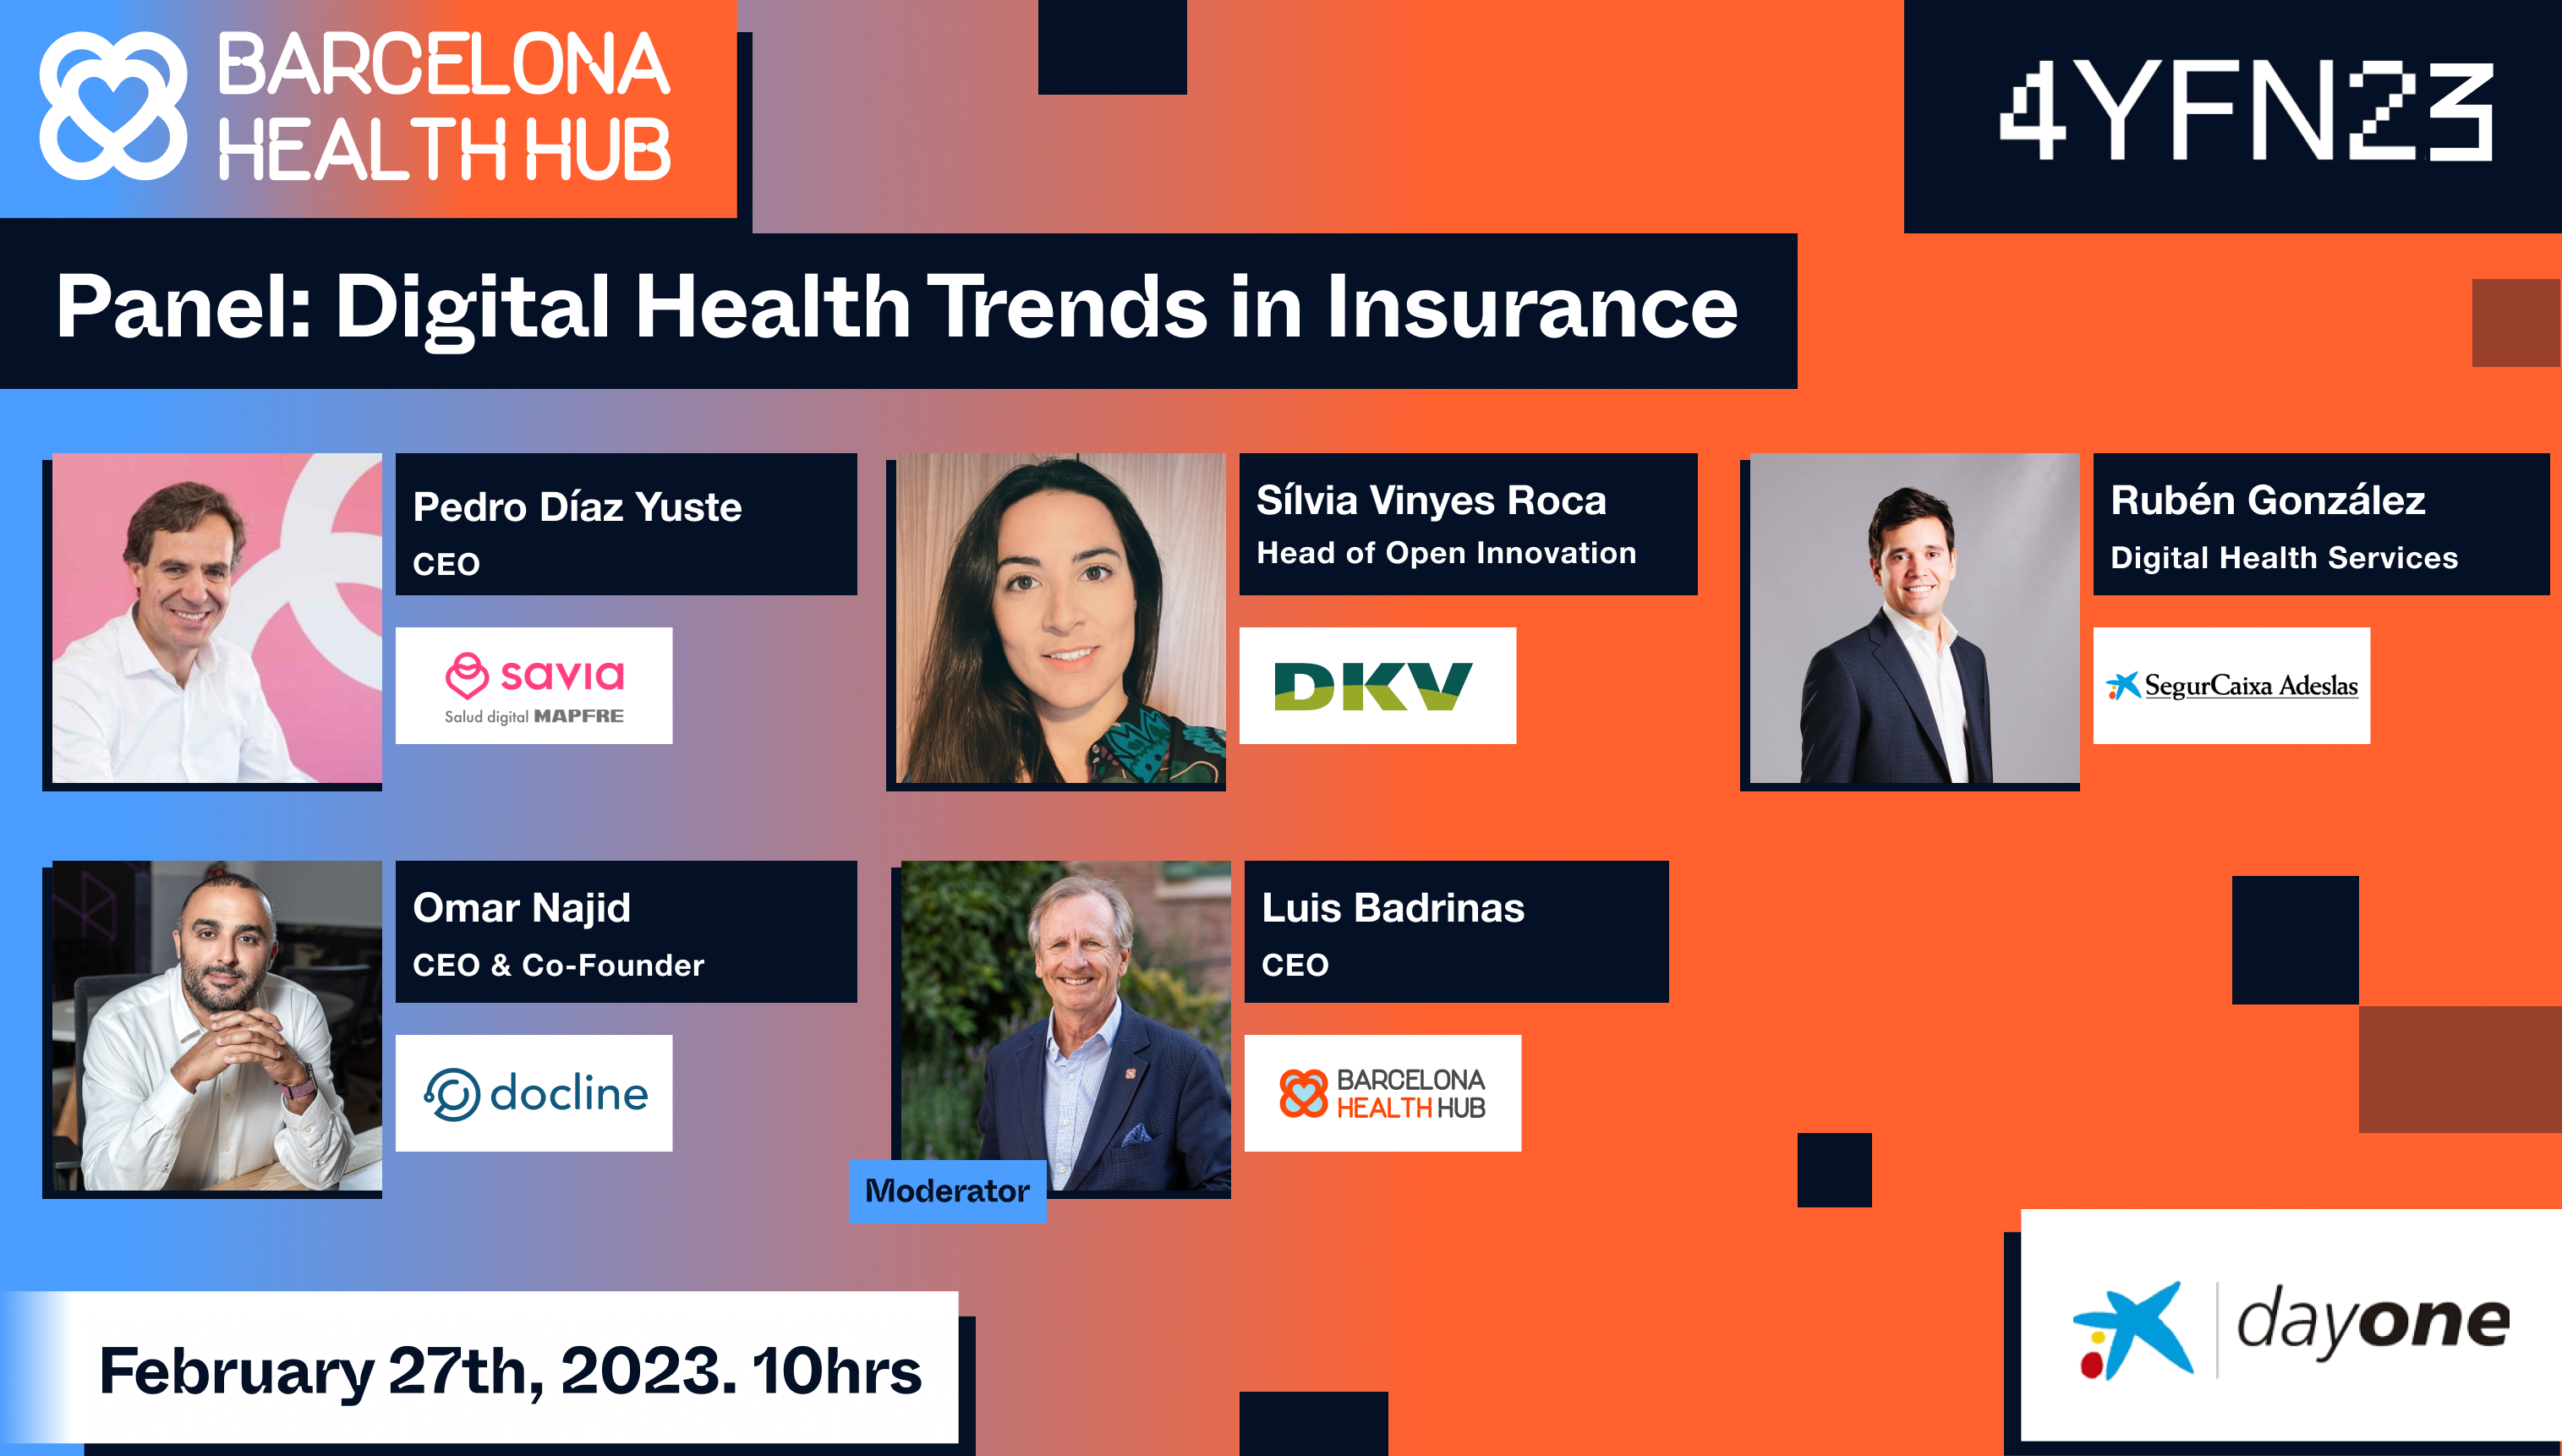 4YFN – Join the #BHHPanel about “Digital Health Trends in Insurance” on February 27th!